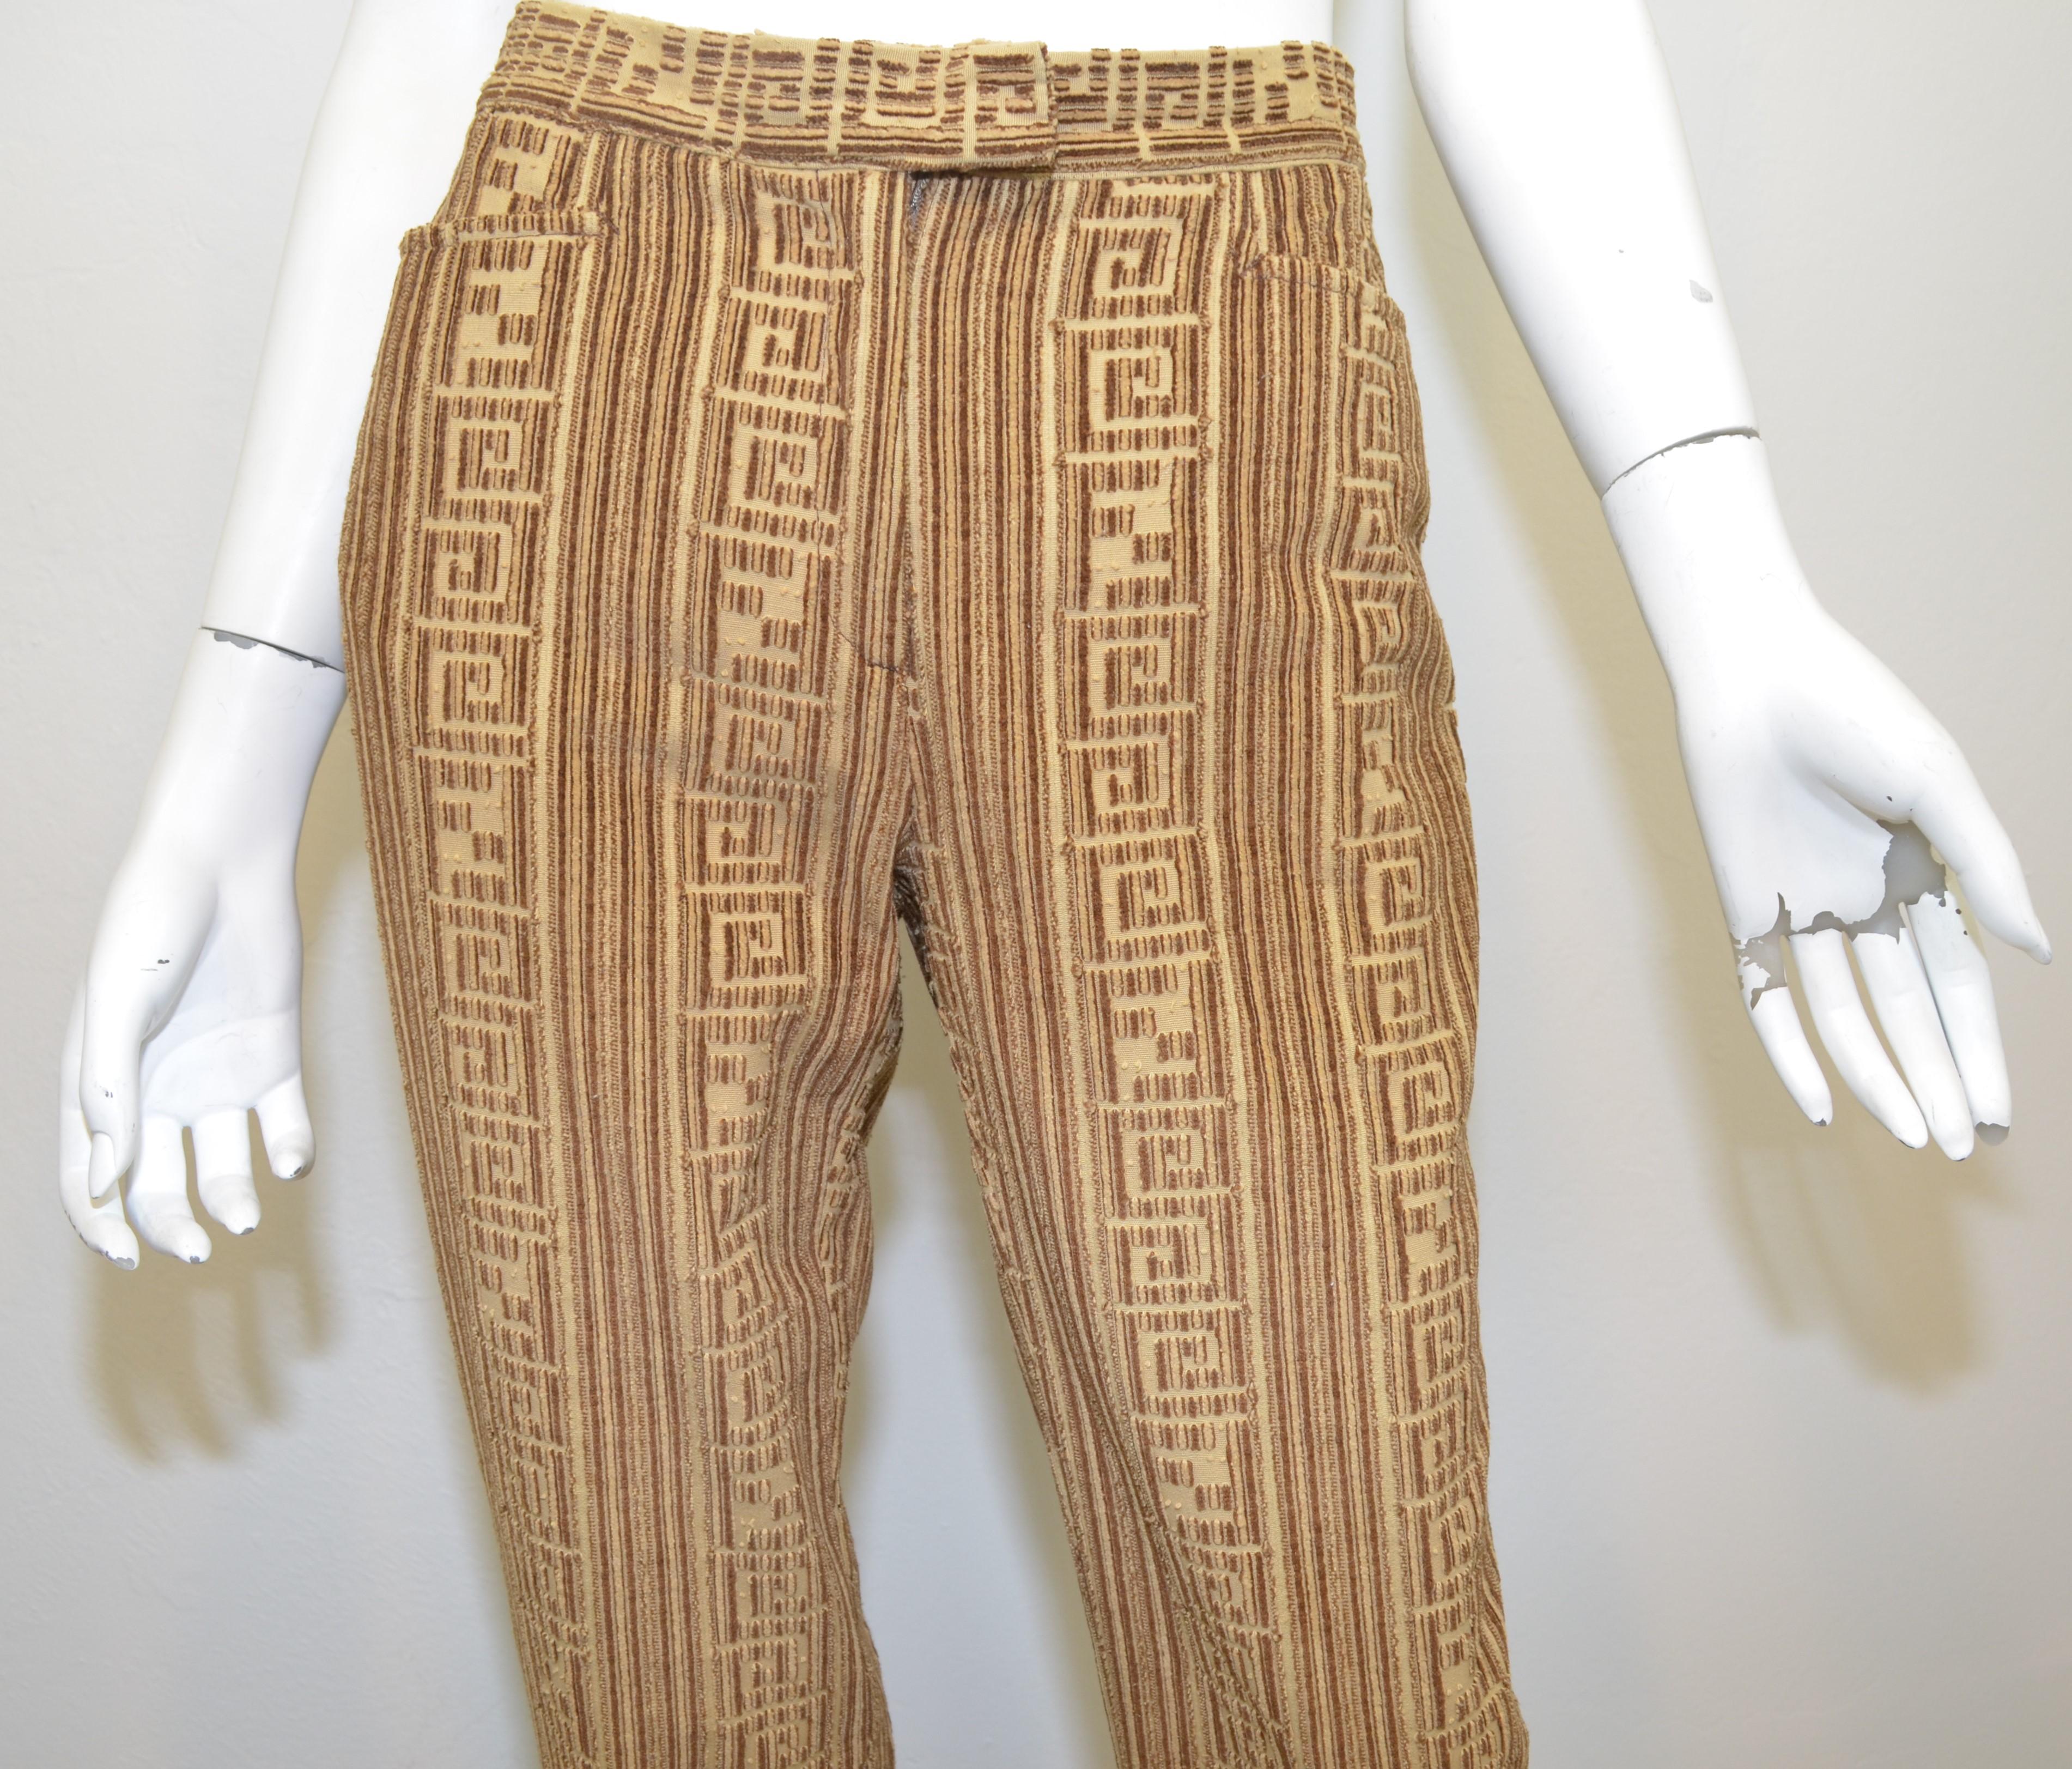 Fendi corduroy pants in tan and brown with a signature Zucca design, zipper and hook closure, functional pockets at the front and a slit back pocket. Pants are labeled size 42, made in Italy.

Measurements:
waist 28''
hips 37''
inseam 33'' 
rise